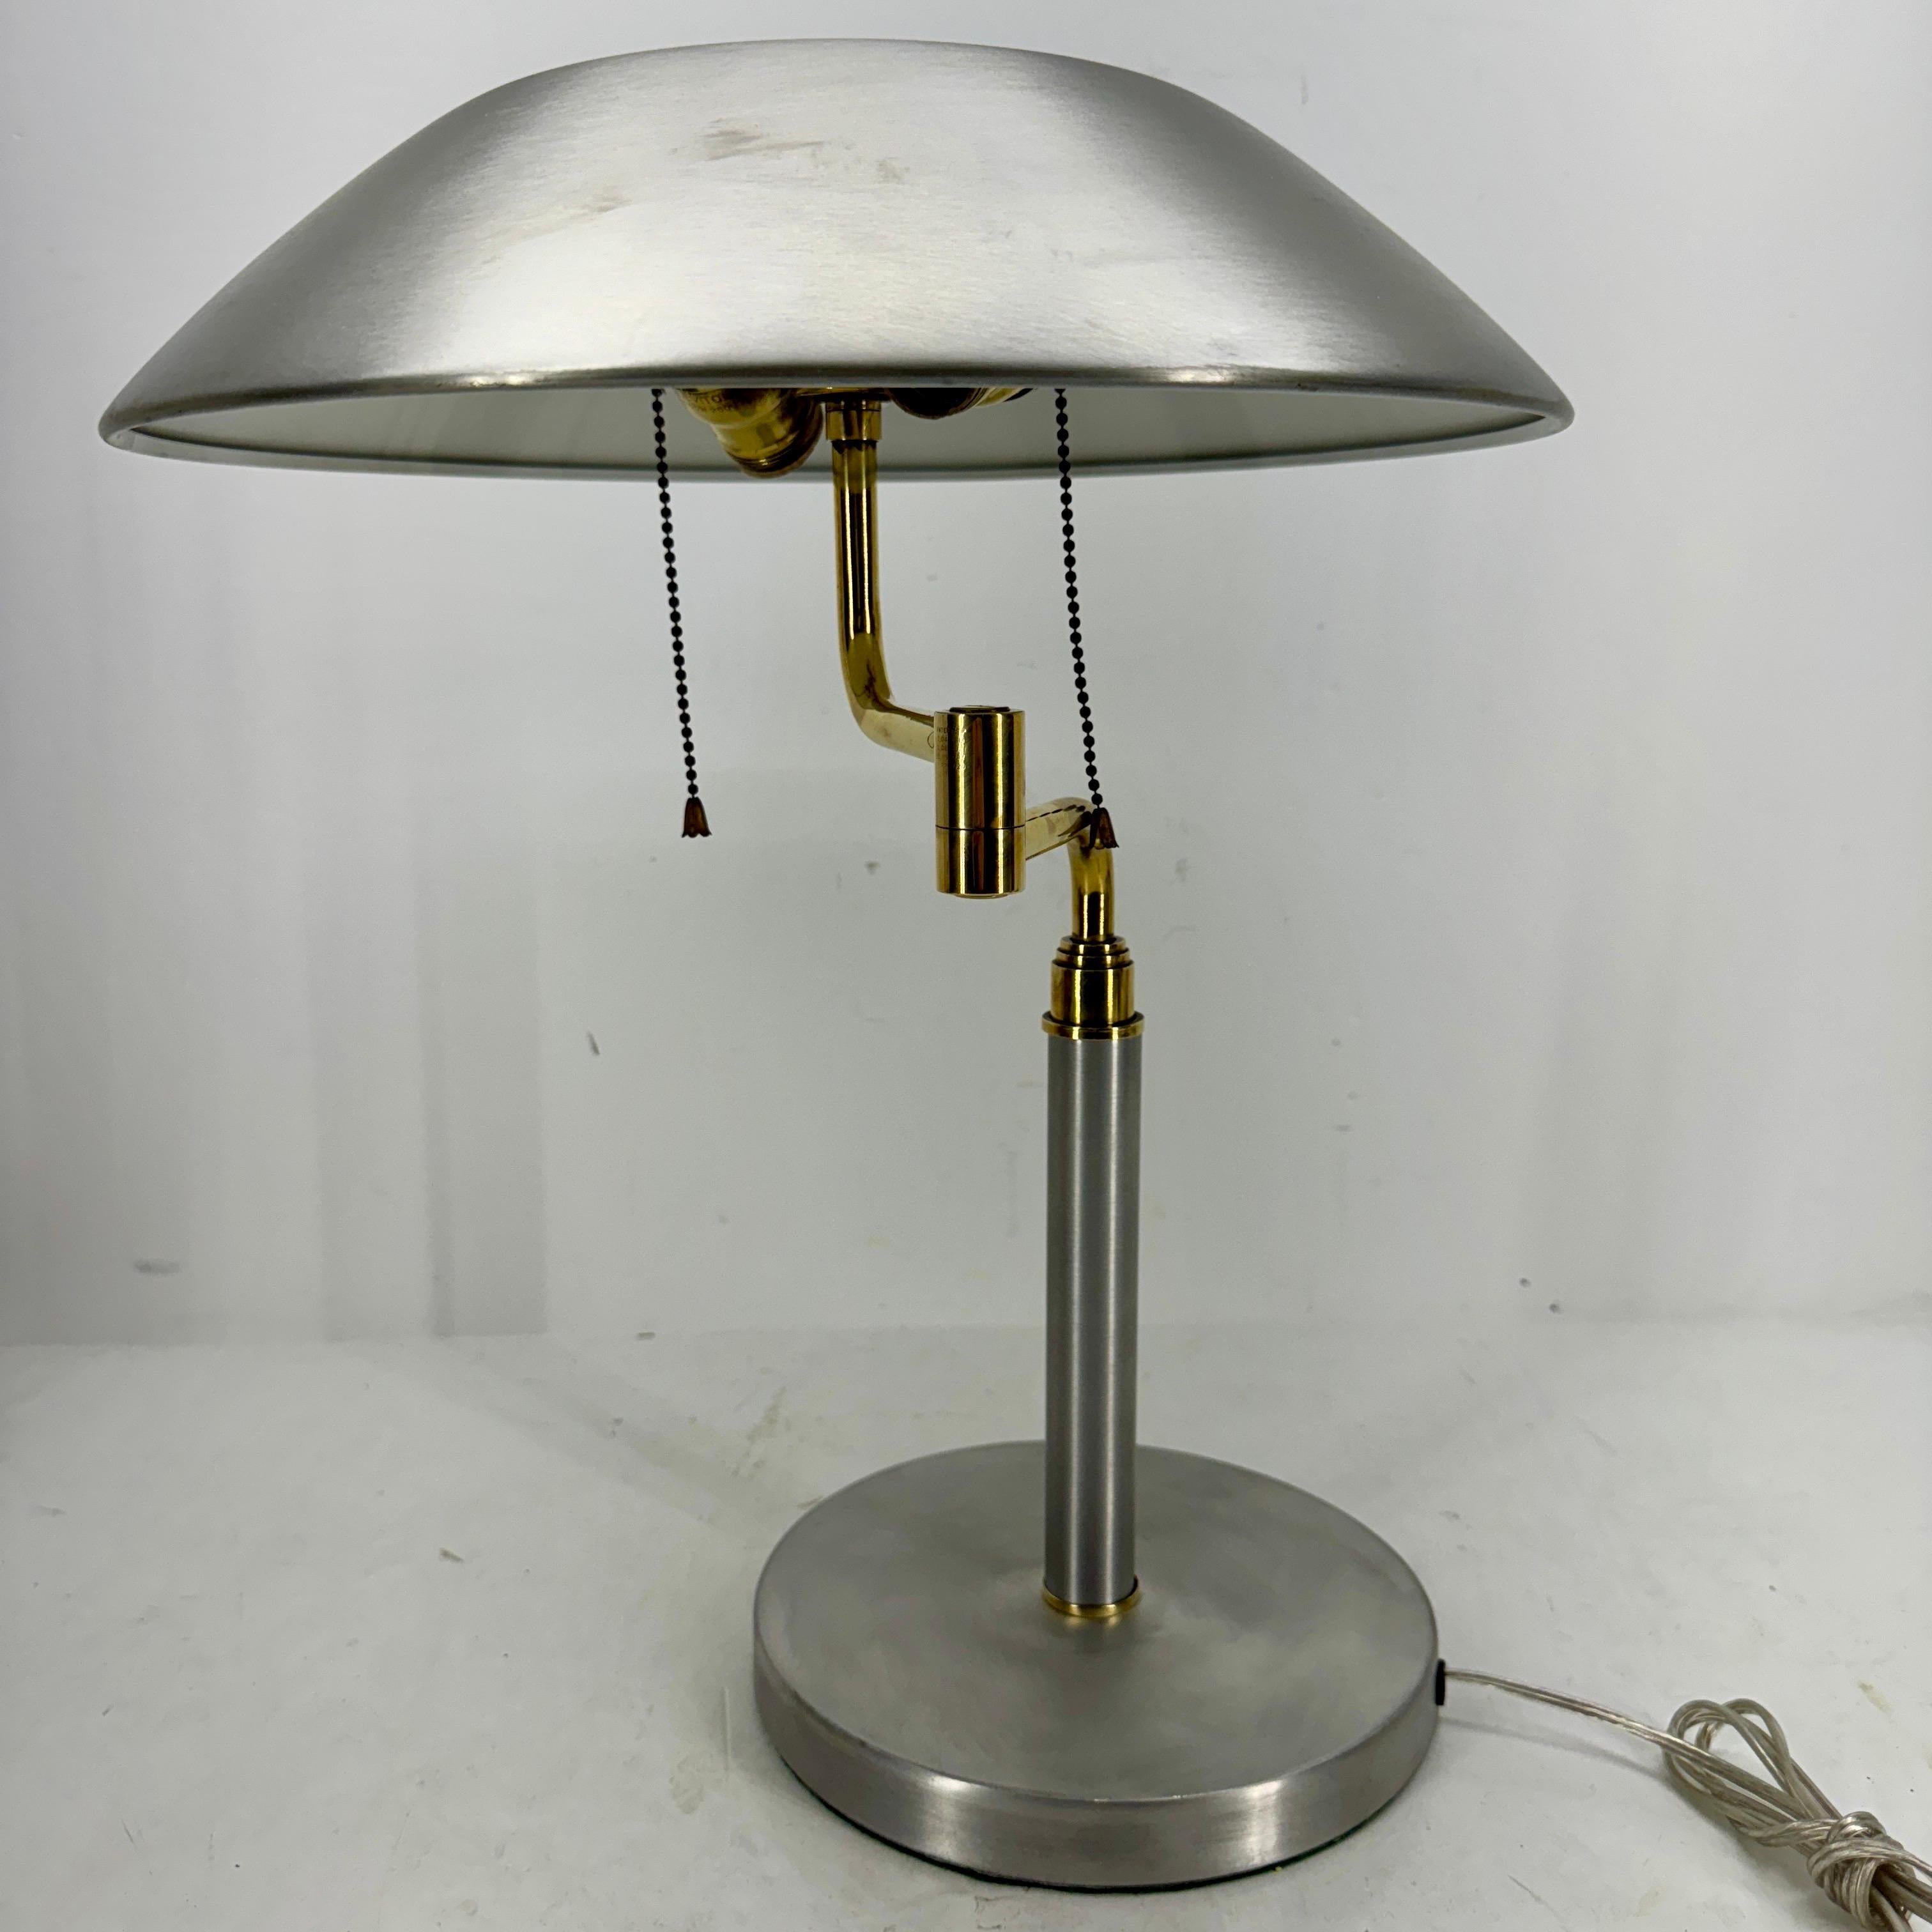 American Vintage Mid-Century Modern Desk Lamp in Aluminum and Brass  For Sale 9